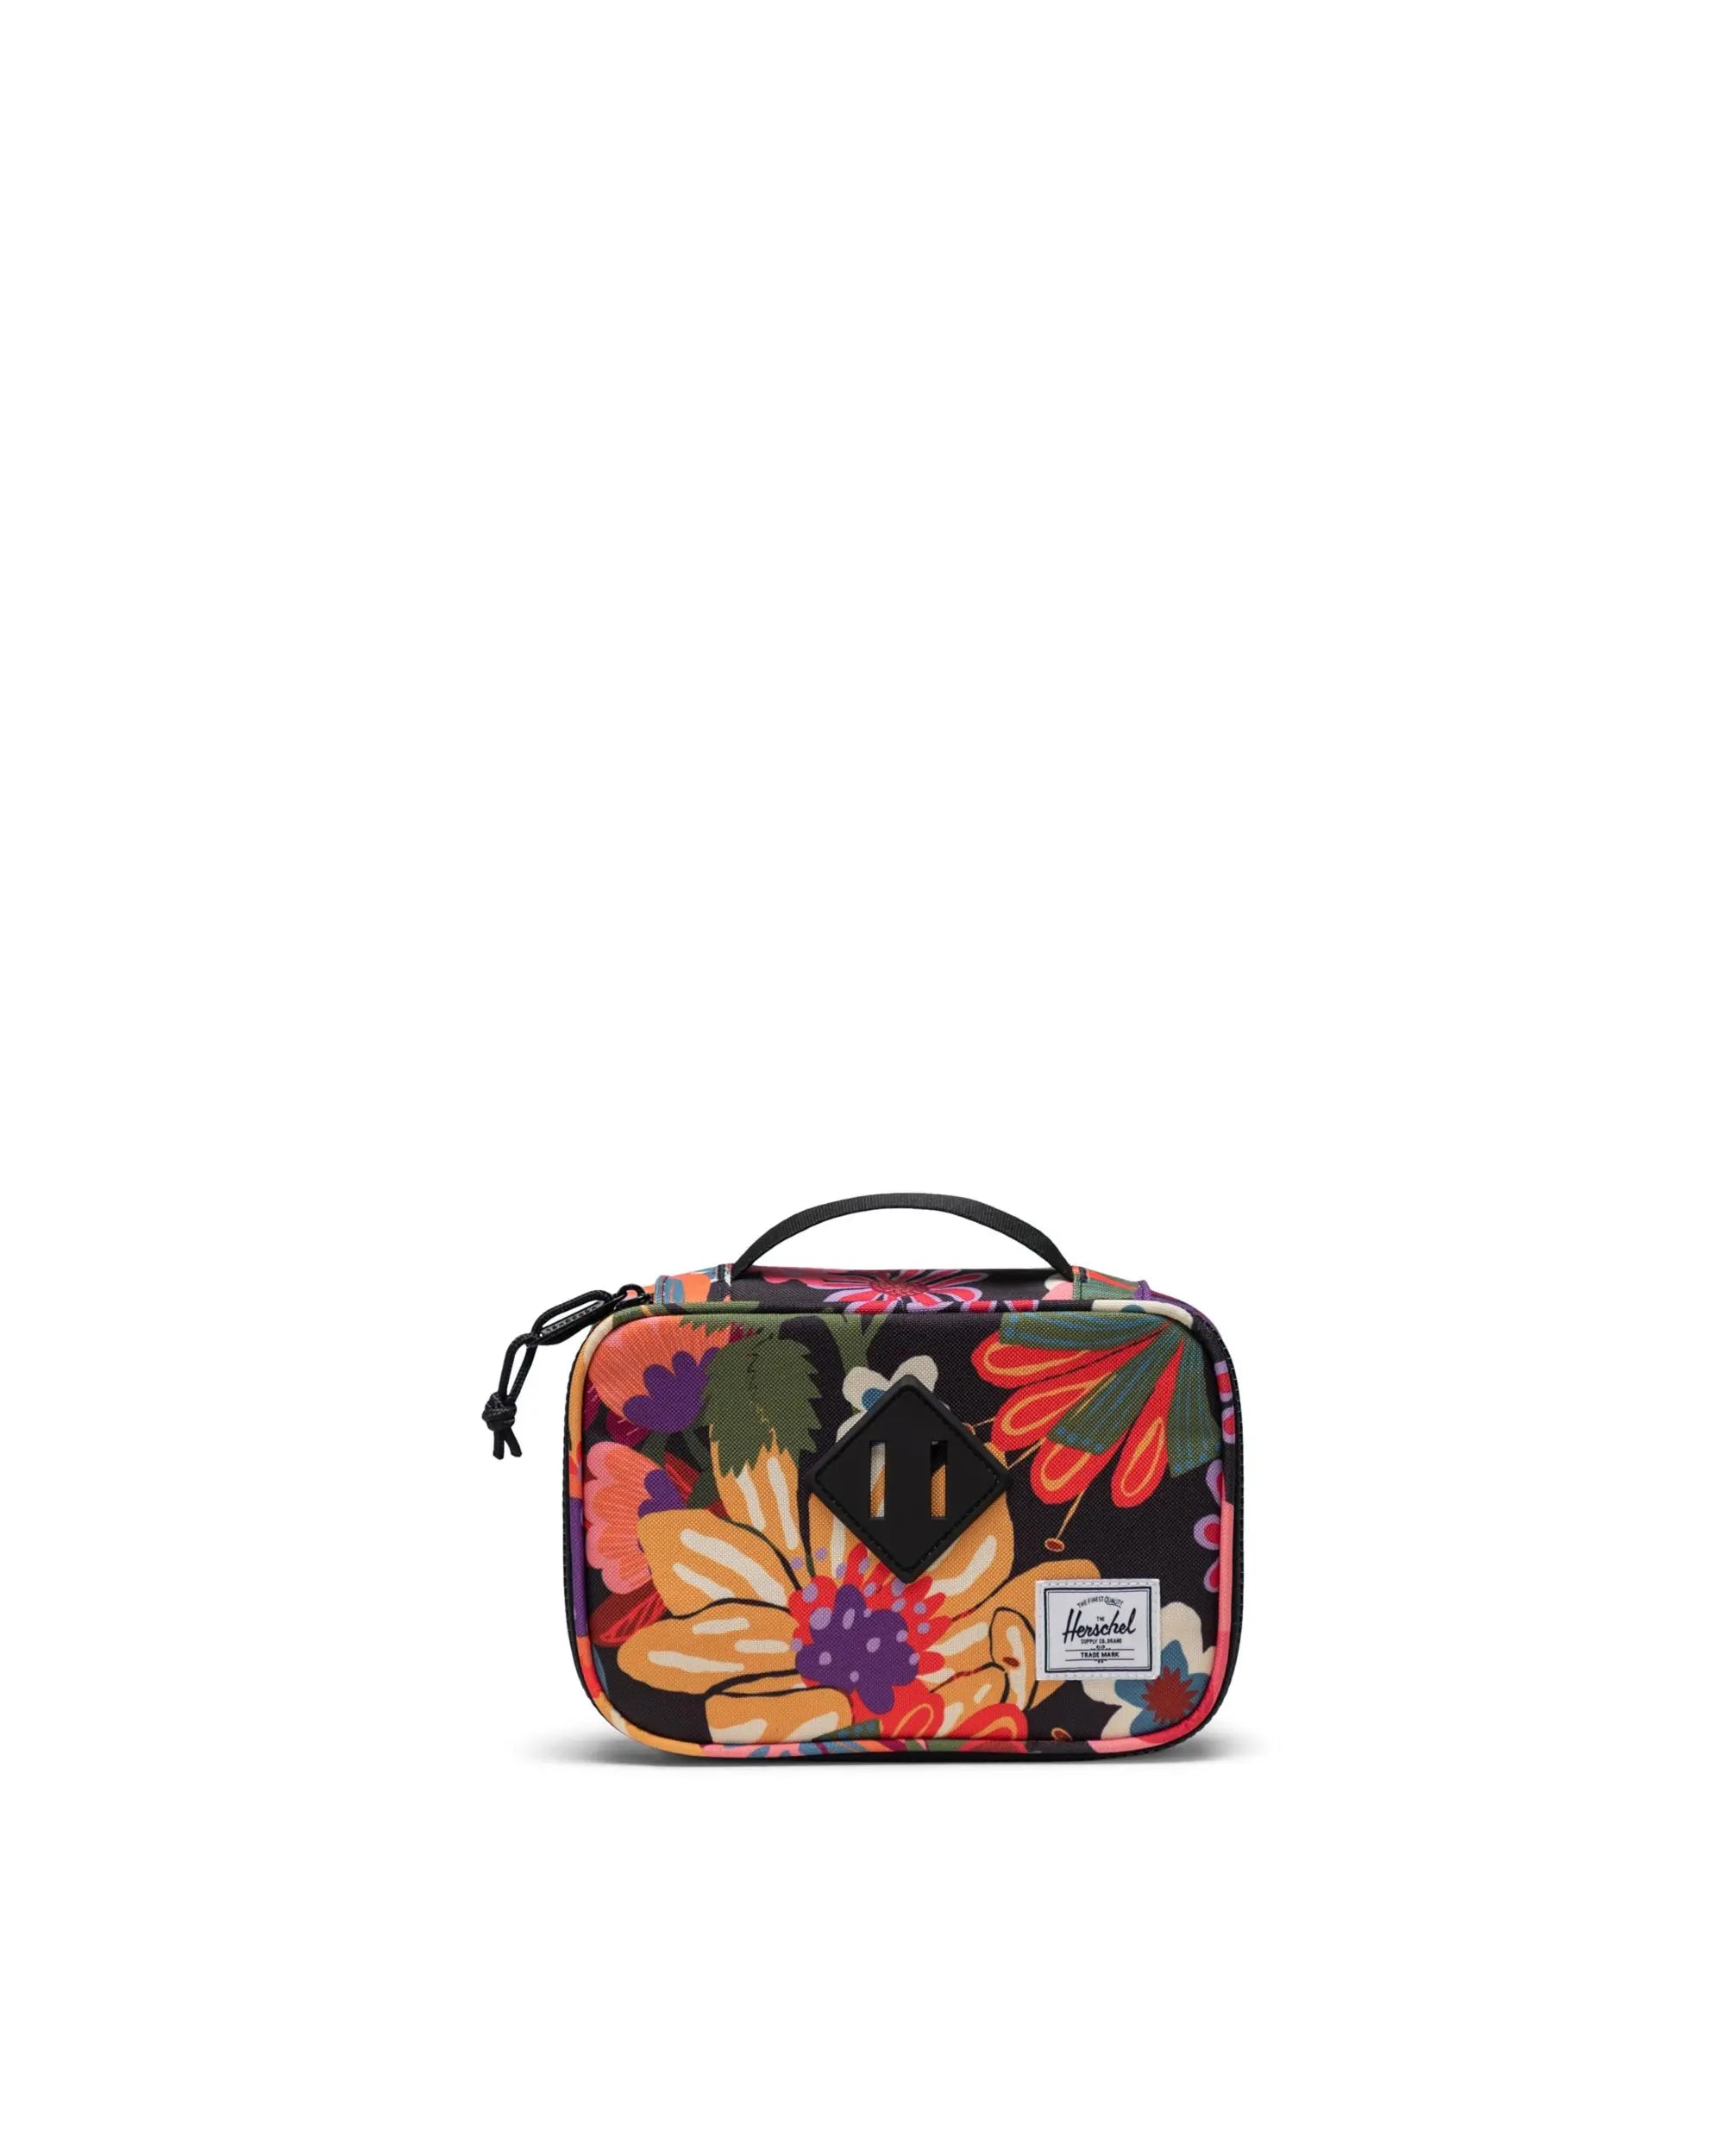 Herschel Supply Co. | Heritage Pencil Case - Fall Blooms